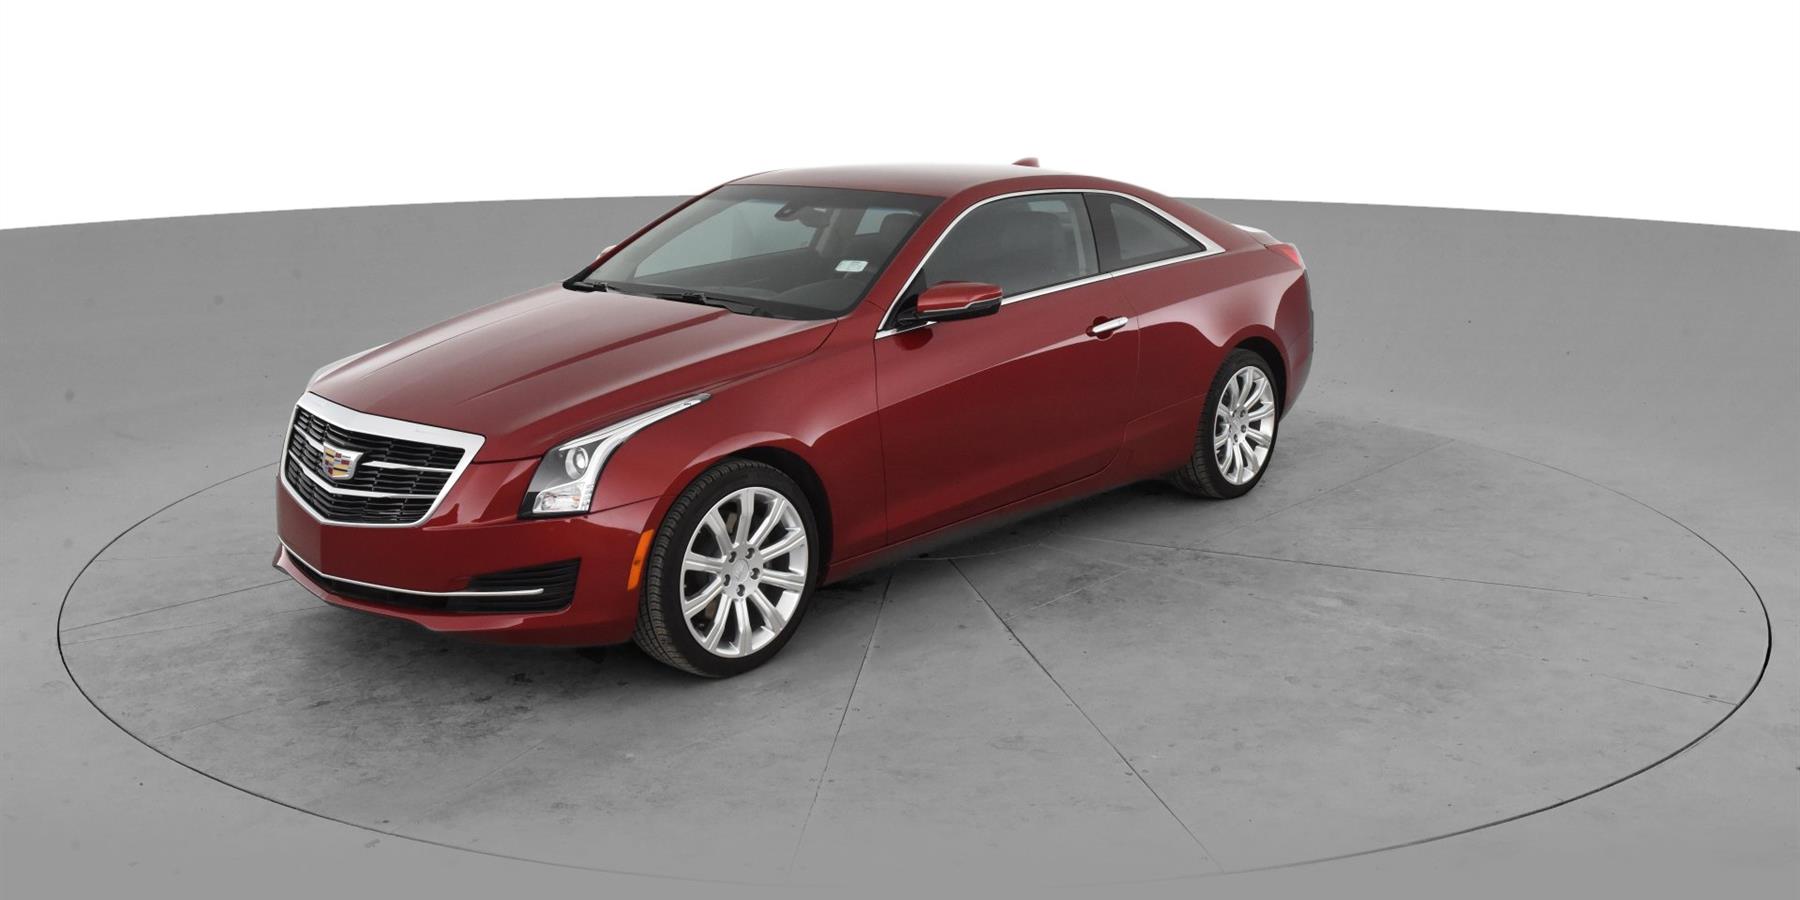 2018 Cadillac Ats Coupe 2d For Sale Carvana